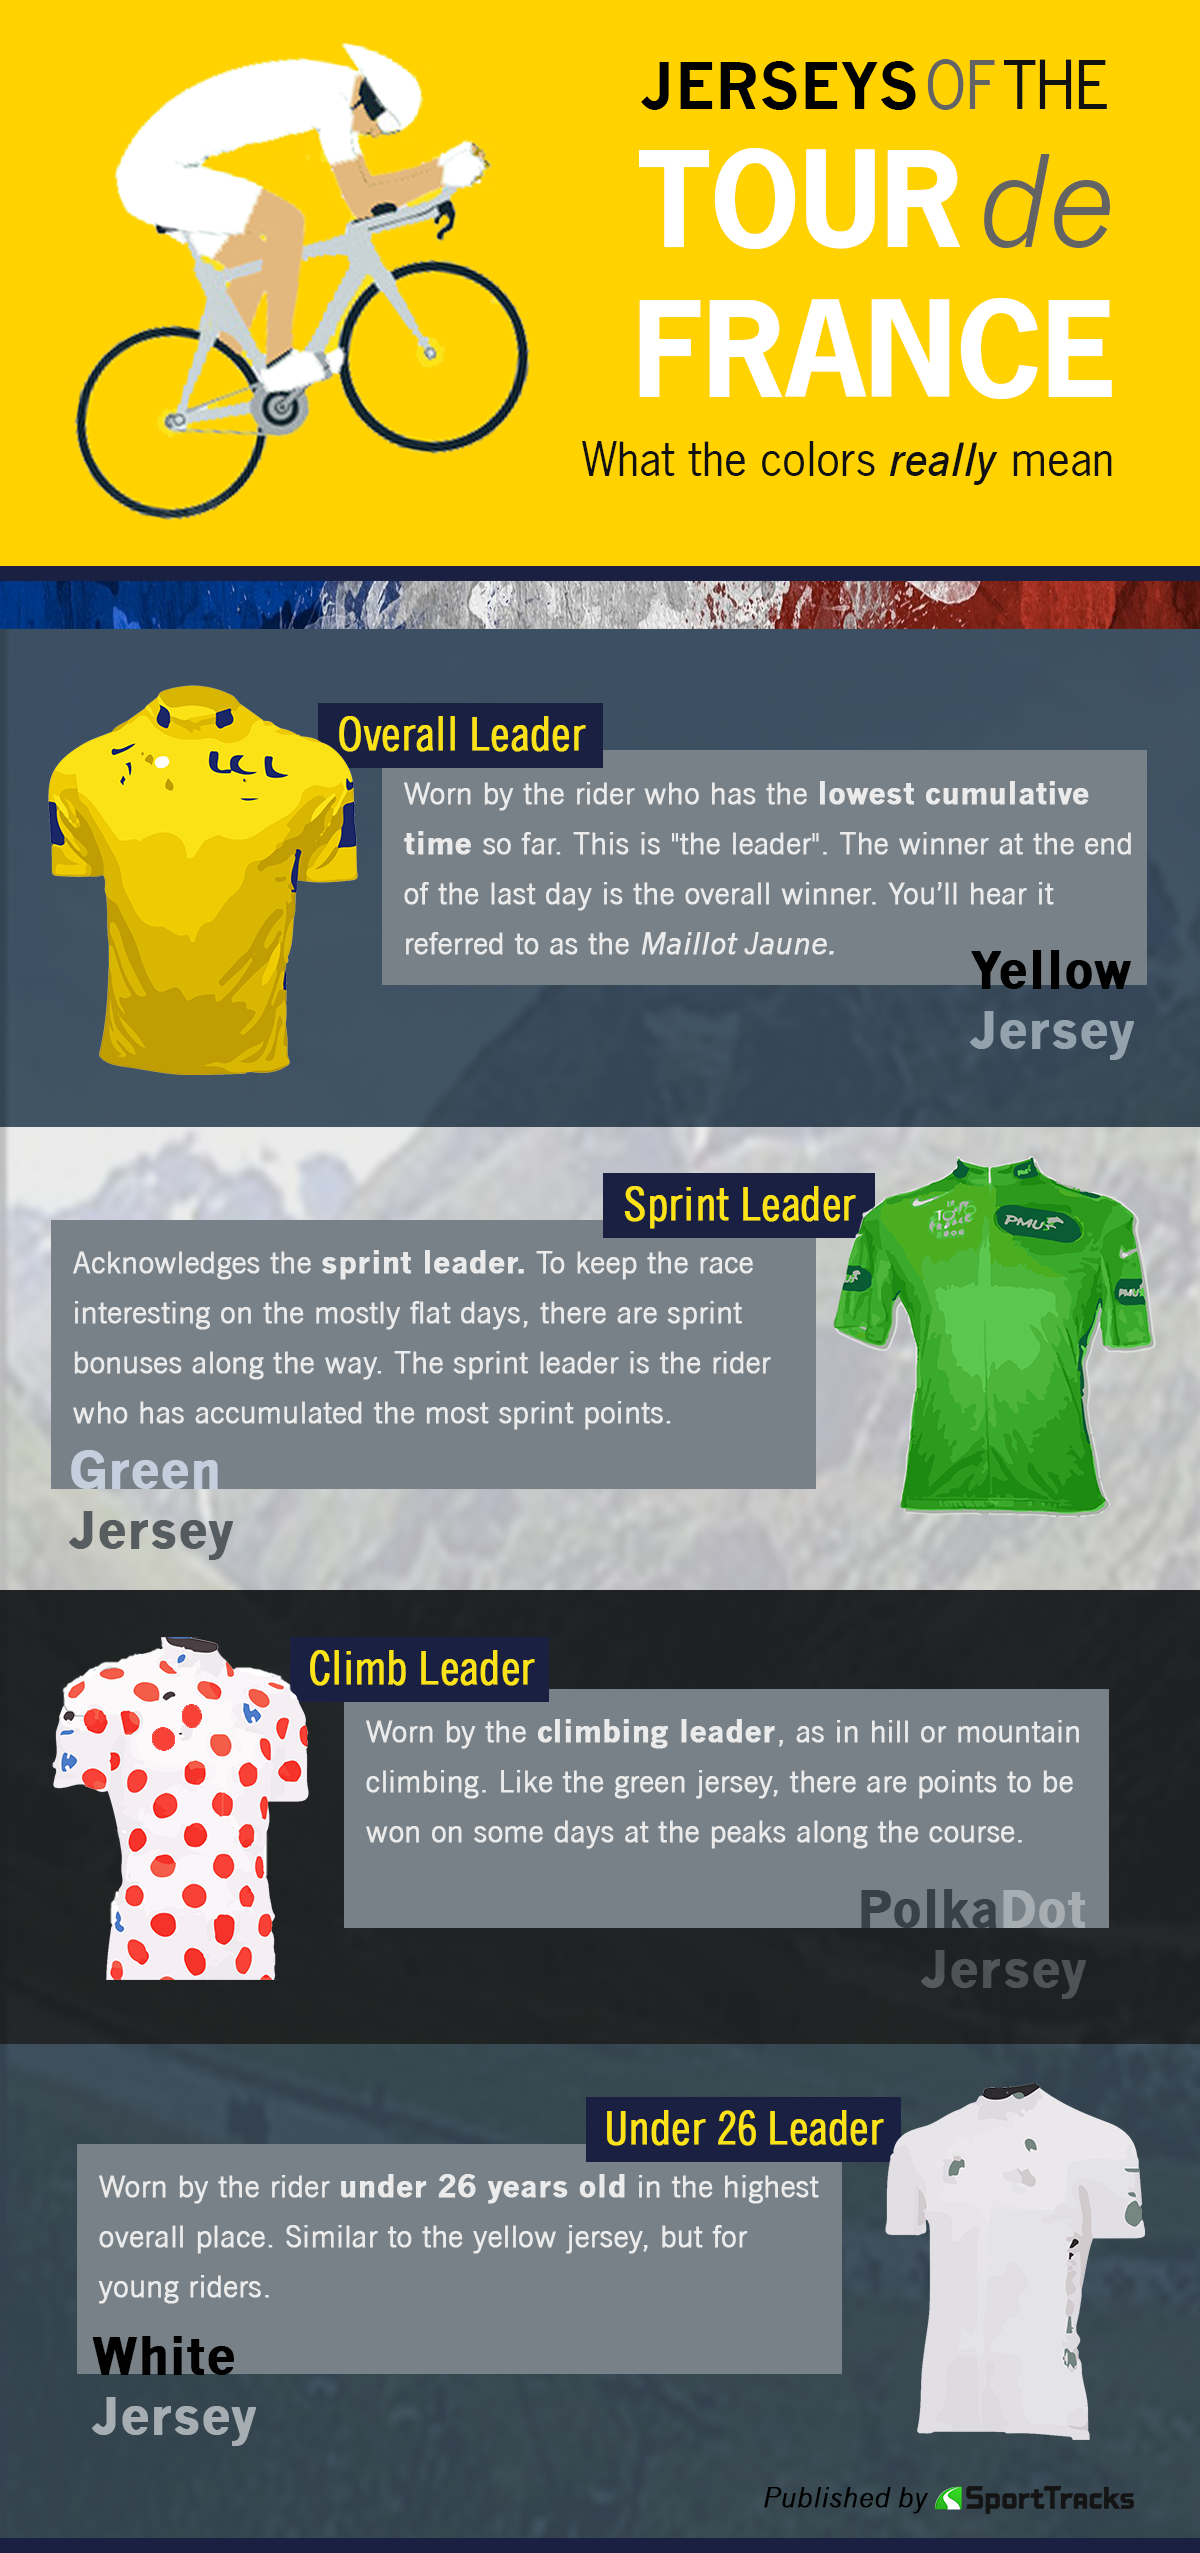 meaning of green jersey in tour de france